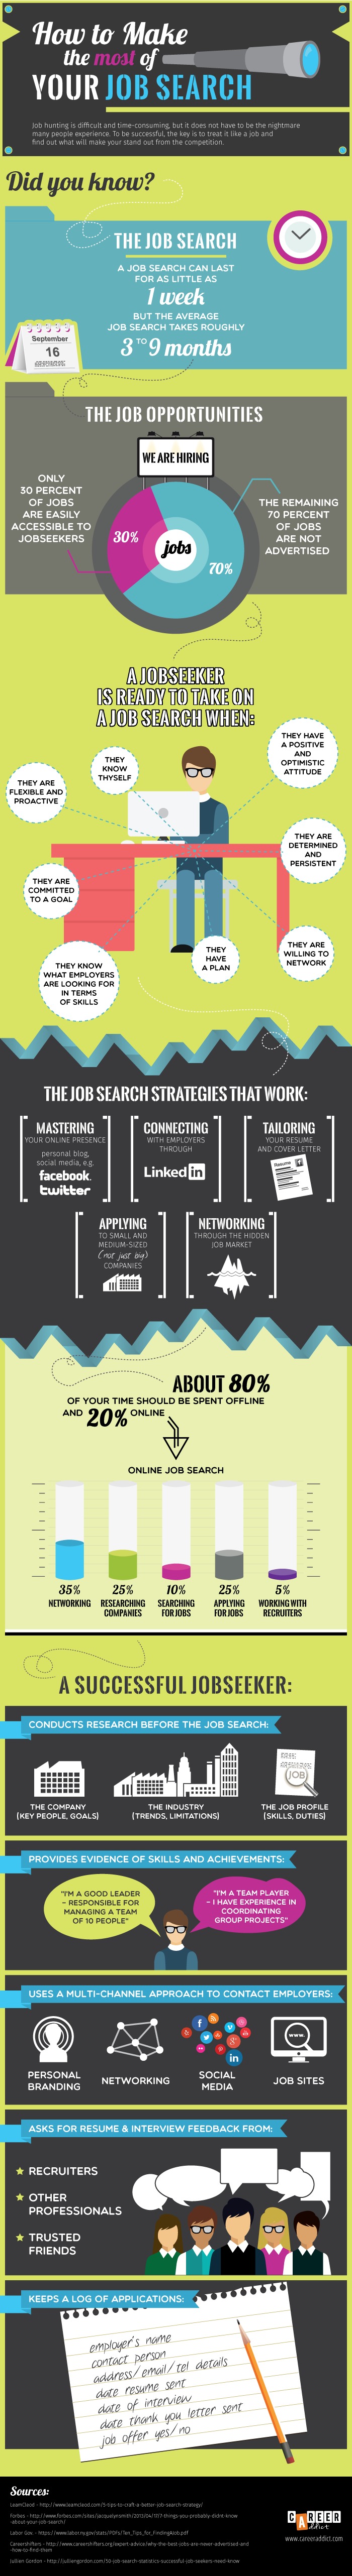 how to make the most of your job search infographic